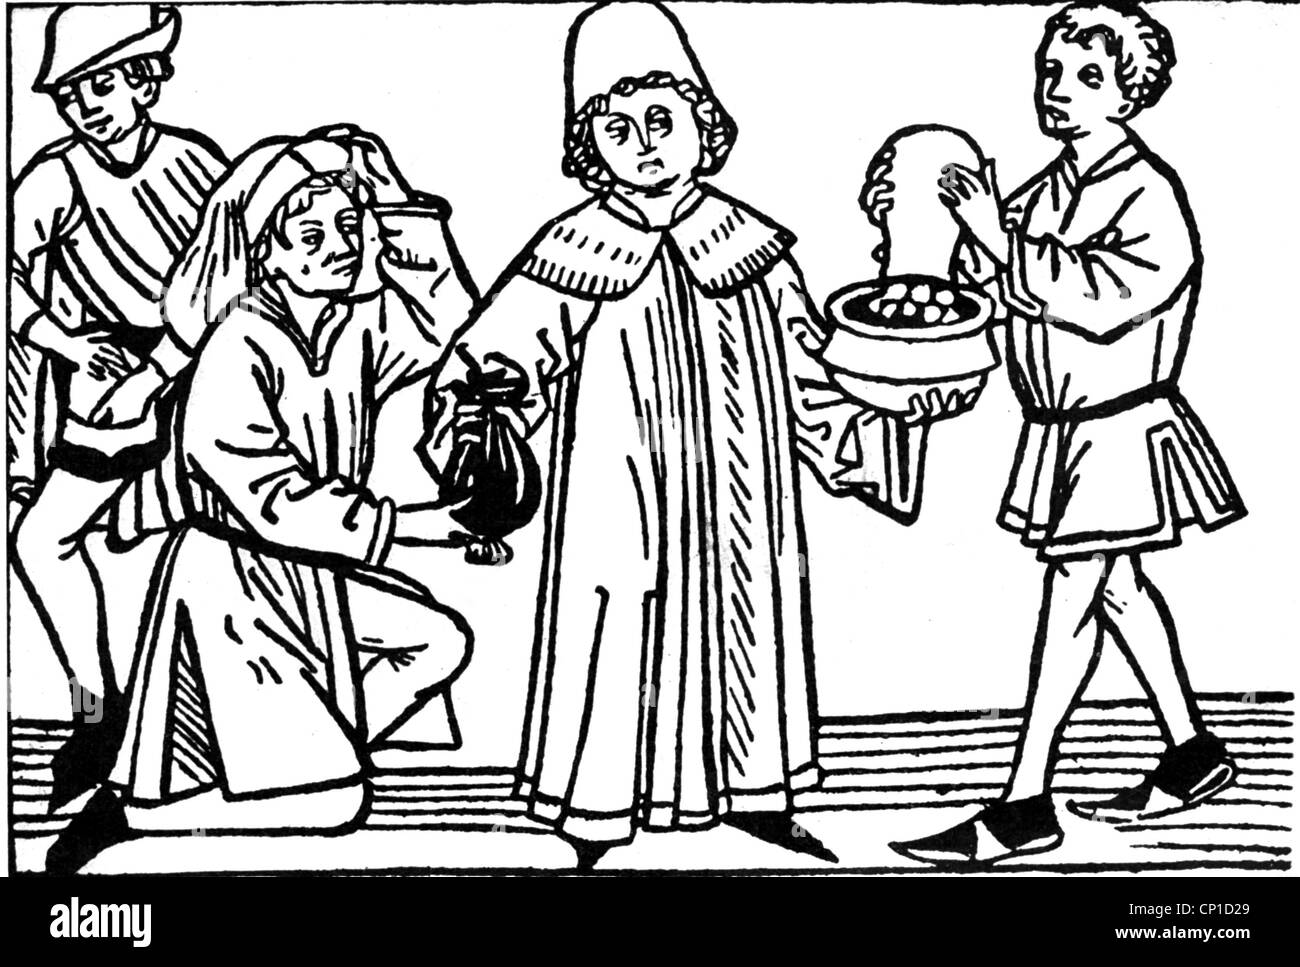 money / finance, interest and taxes, taxman taking tax and tithe, woodcut, 15th century, exciseman, gauger, tax collector, historic, historical, feudalism, medieval times, Middle Ages, farmer, vassal, vassals, people, profession, Additional-Rights-Clearences-Not Available Stock Photo